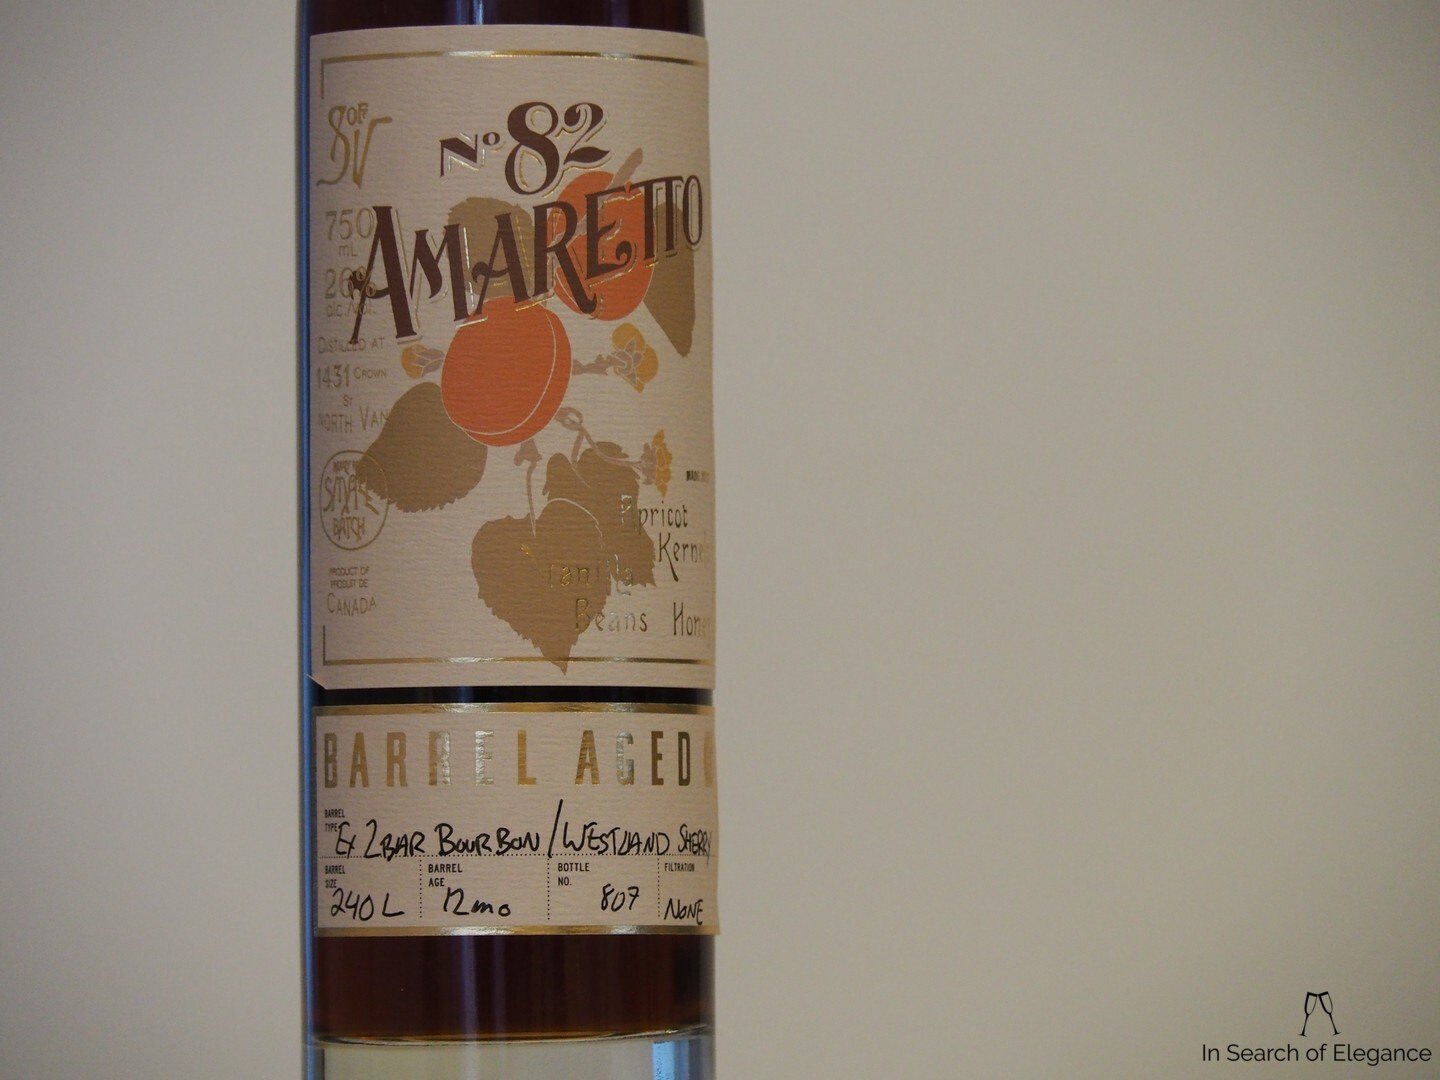 Sons of Vancouver Barrel Aged Amaretto 1.jpg